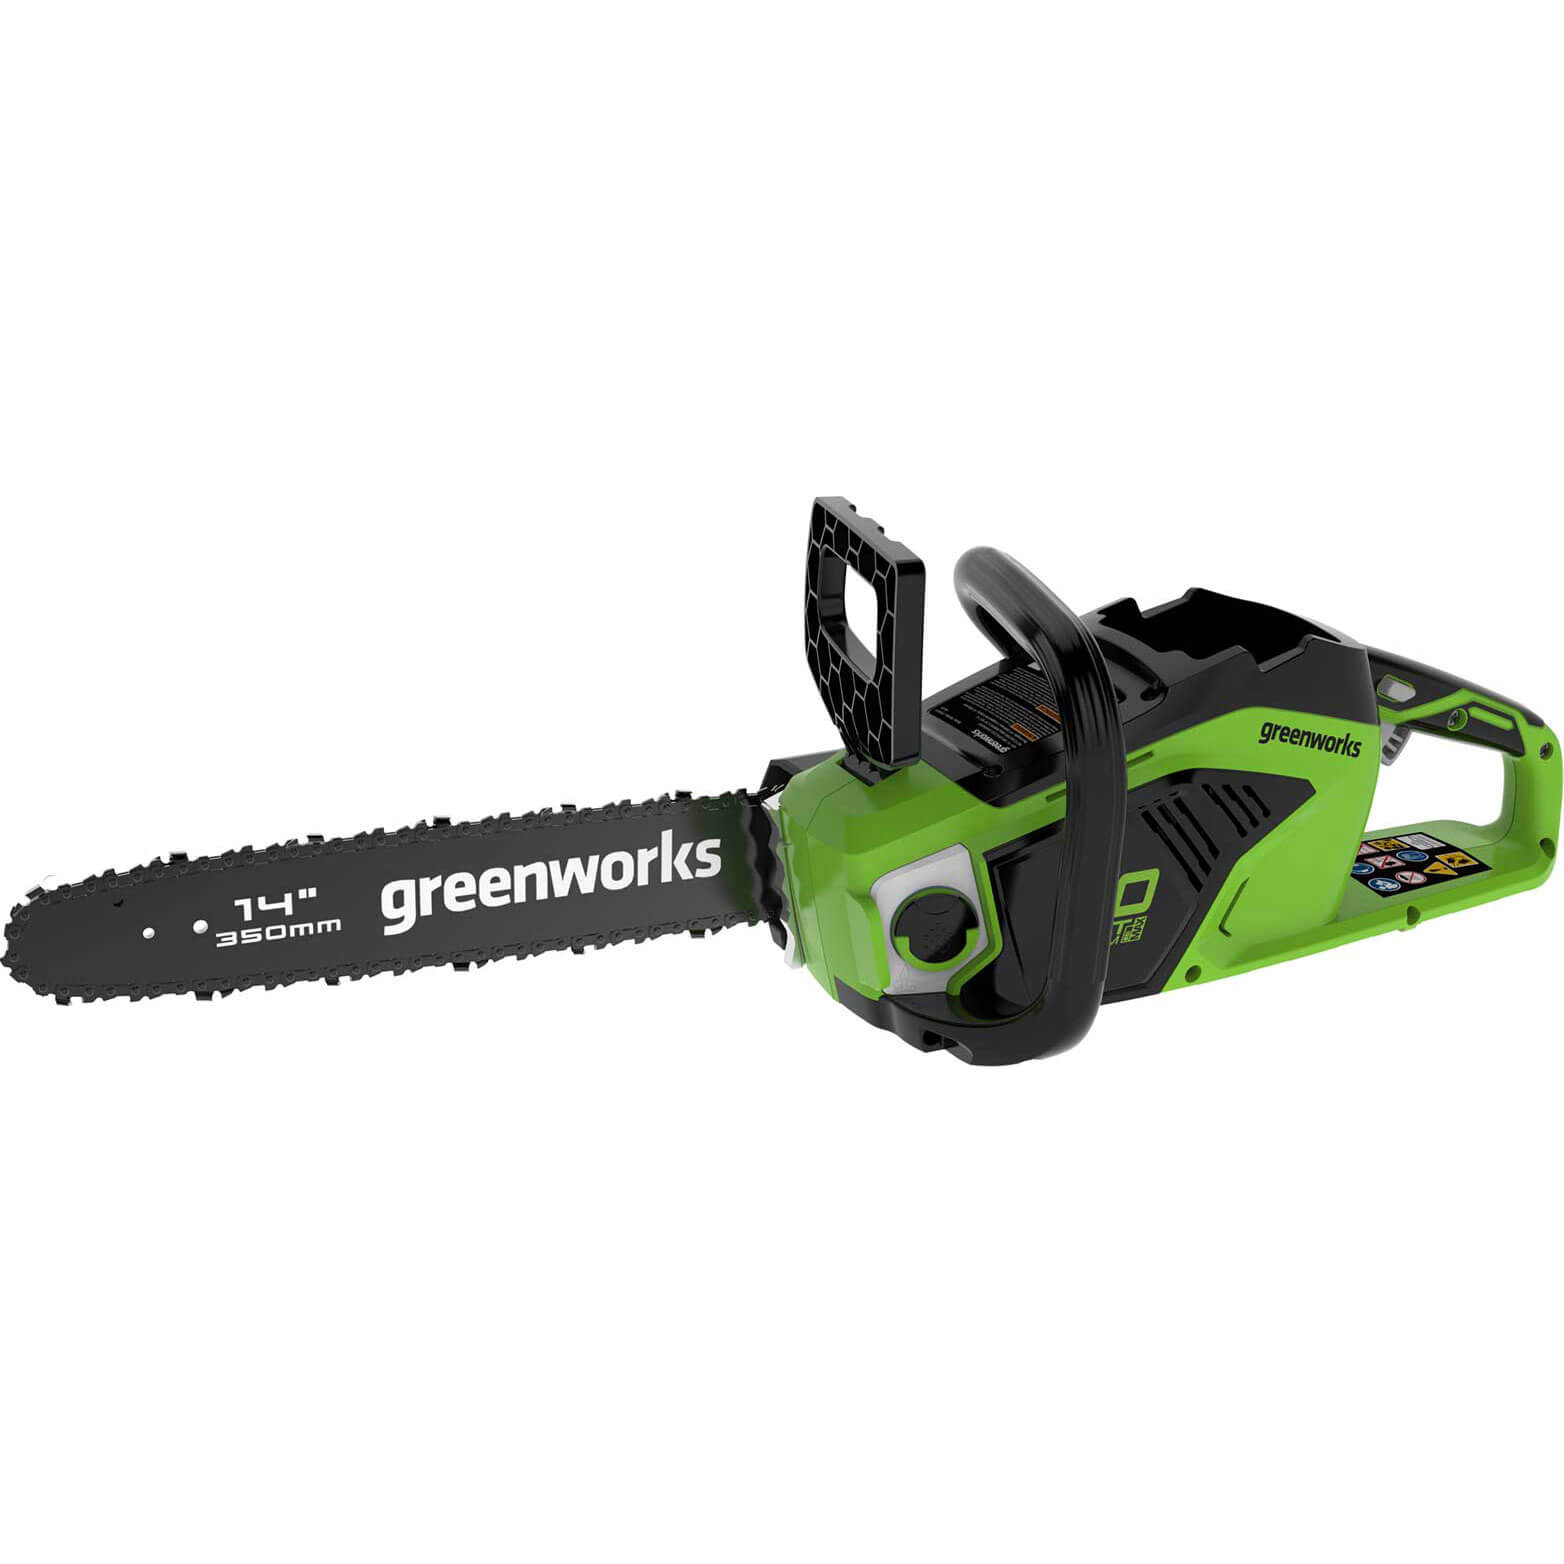 Image of Greenworks GD40CS15 40v Cordless Brushless Chainsaw 350mm No Batteries No Charger